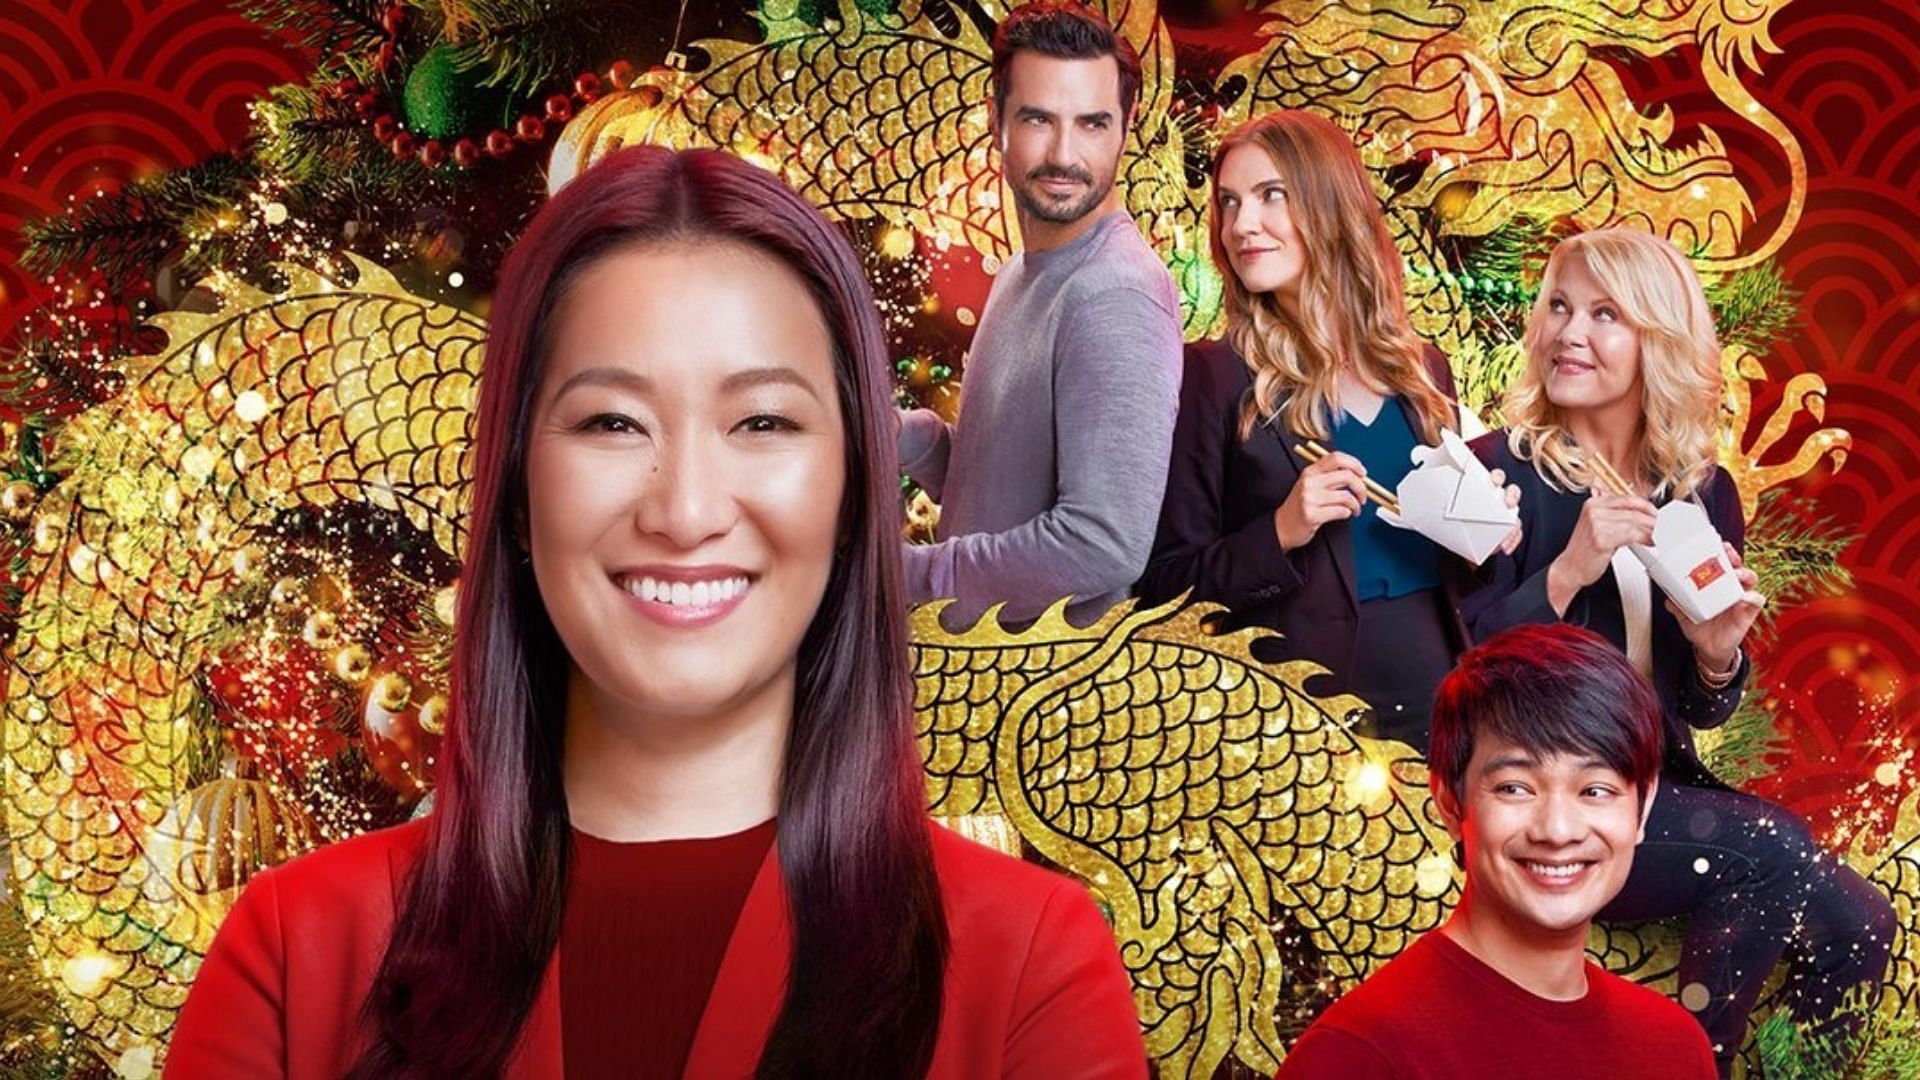 A promotional poster for Christmas at the Golden Dragon (Image Via hallmarkchannel/Instagram)